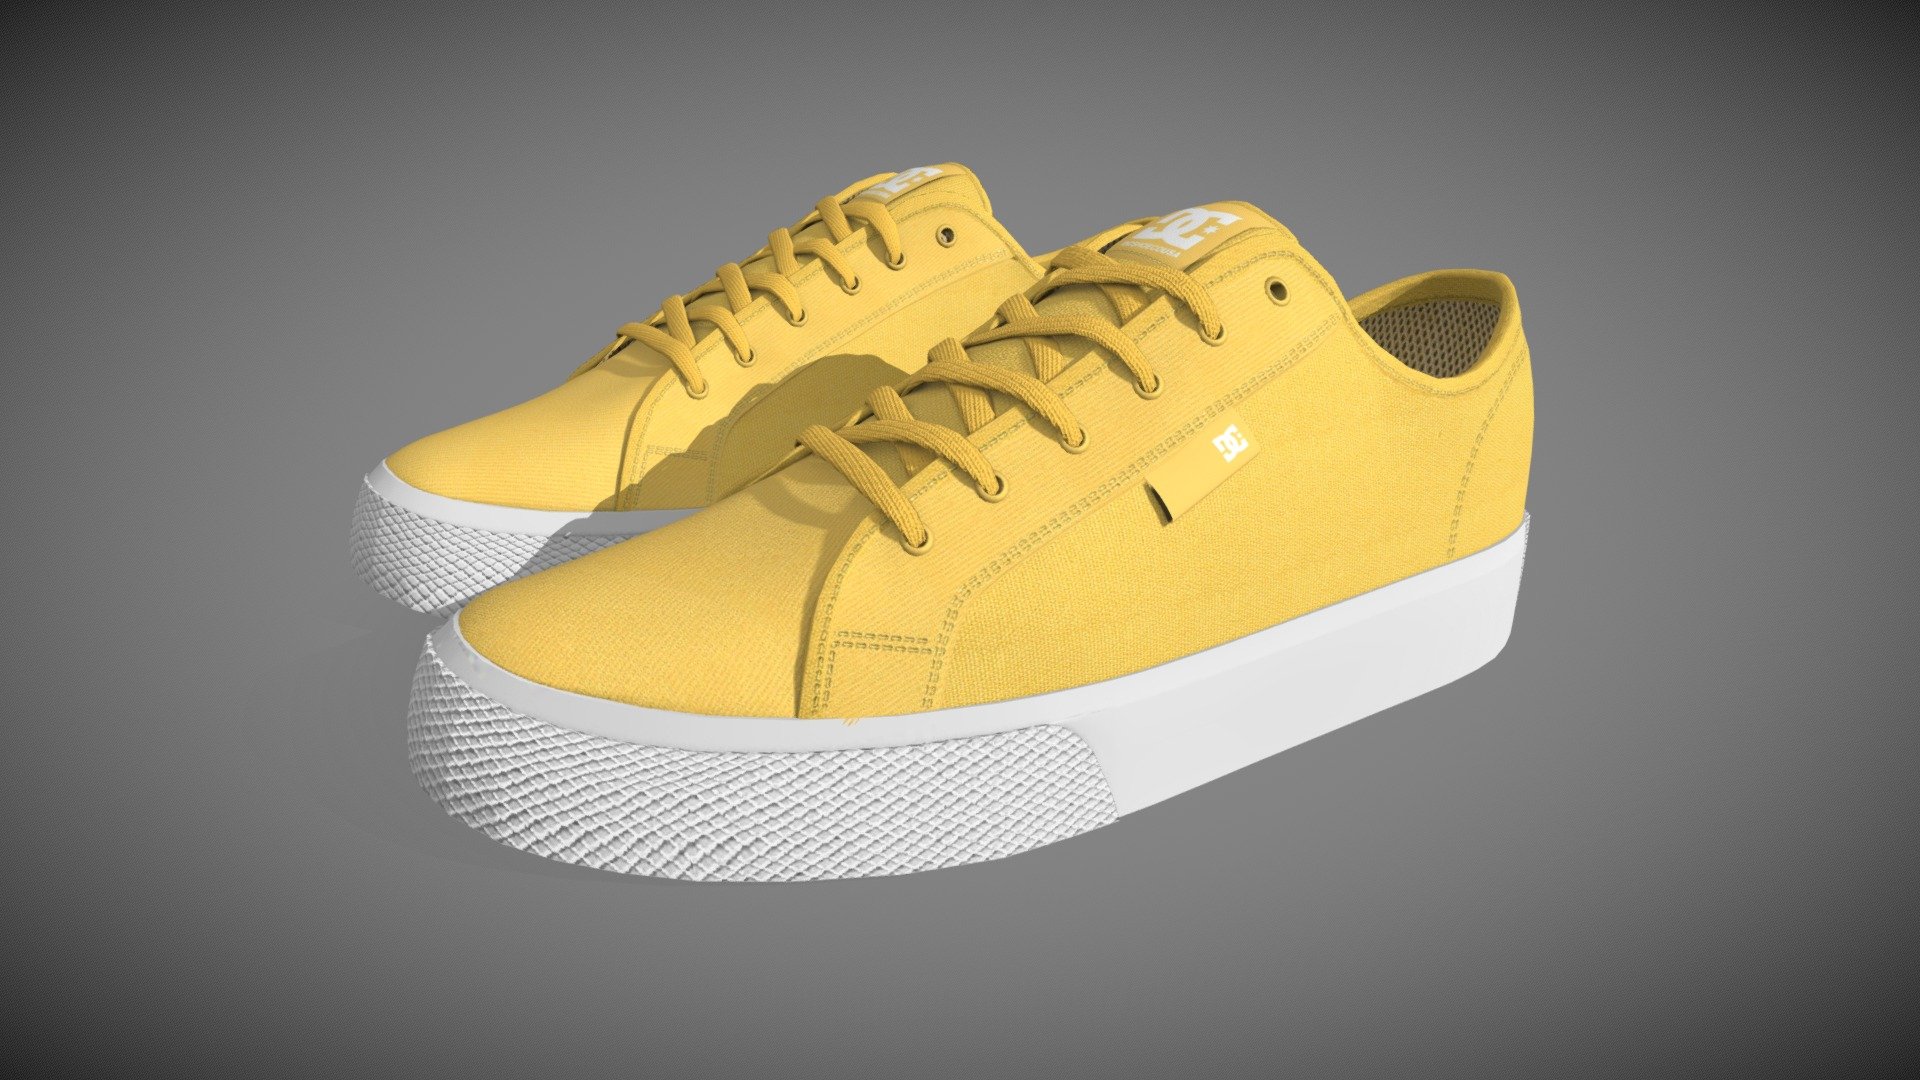 A Practice Model,

softwares used : Autodesk Maya, Substance 3D Painter

If You Like this model.....please leave a “ LIKE ” - Sneaker Shoe - Download Free 3D model by Nelesh_surve 3d model